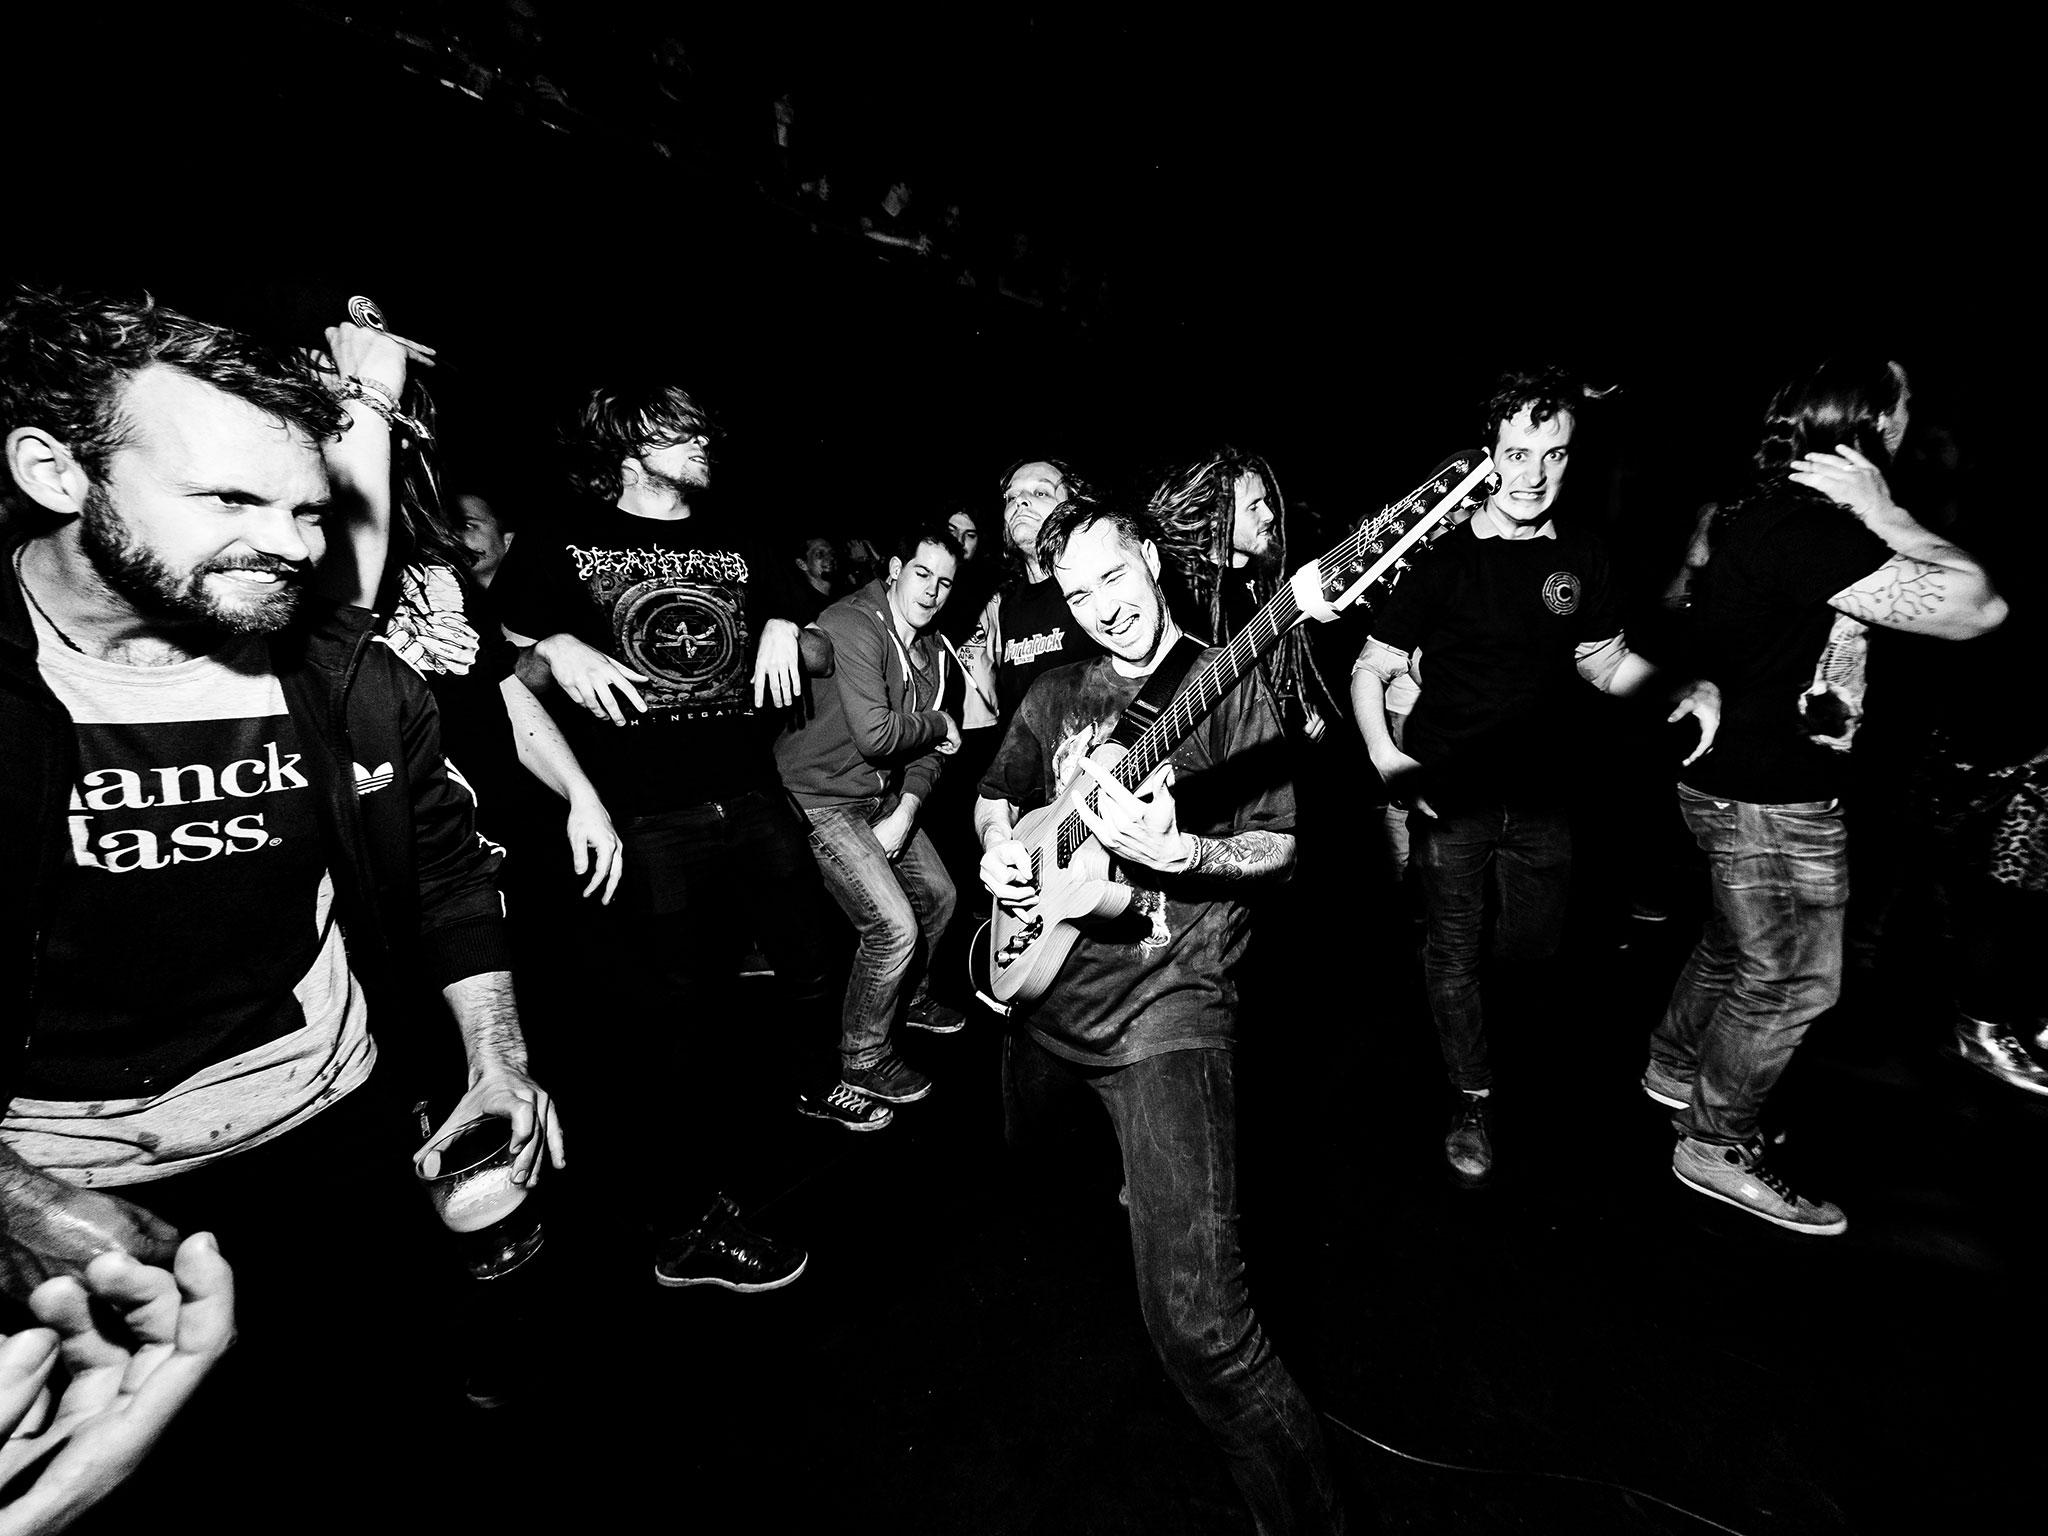 Frontierer guitarist Dan Stevenson gets up close and personal with Complexity's crowd